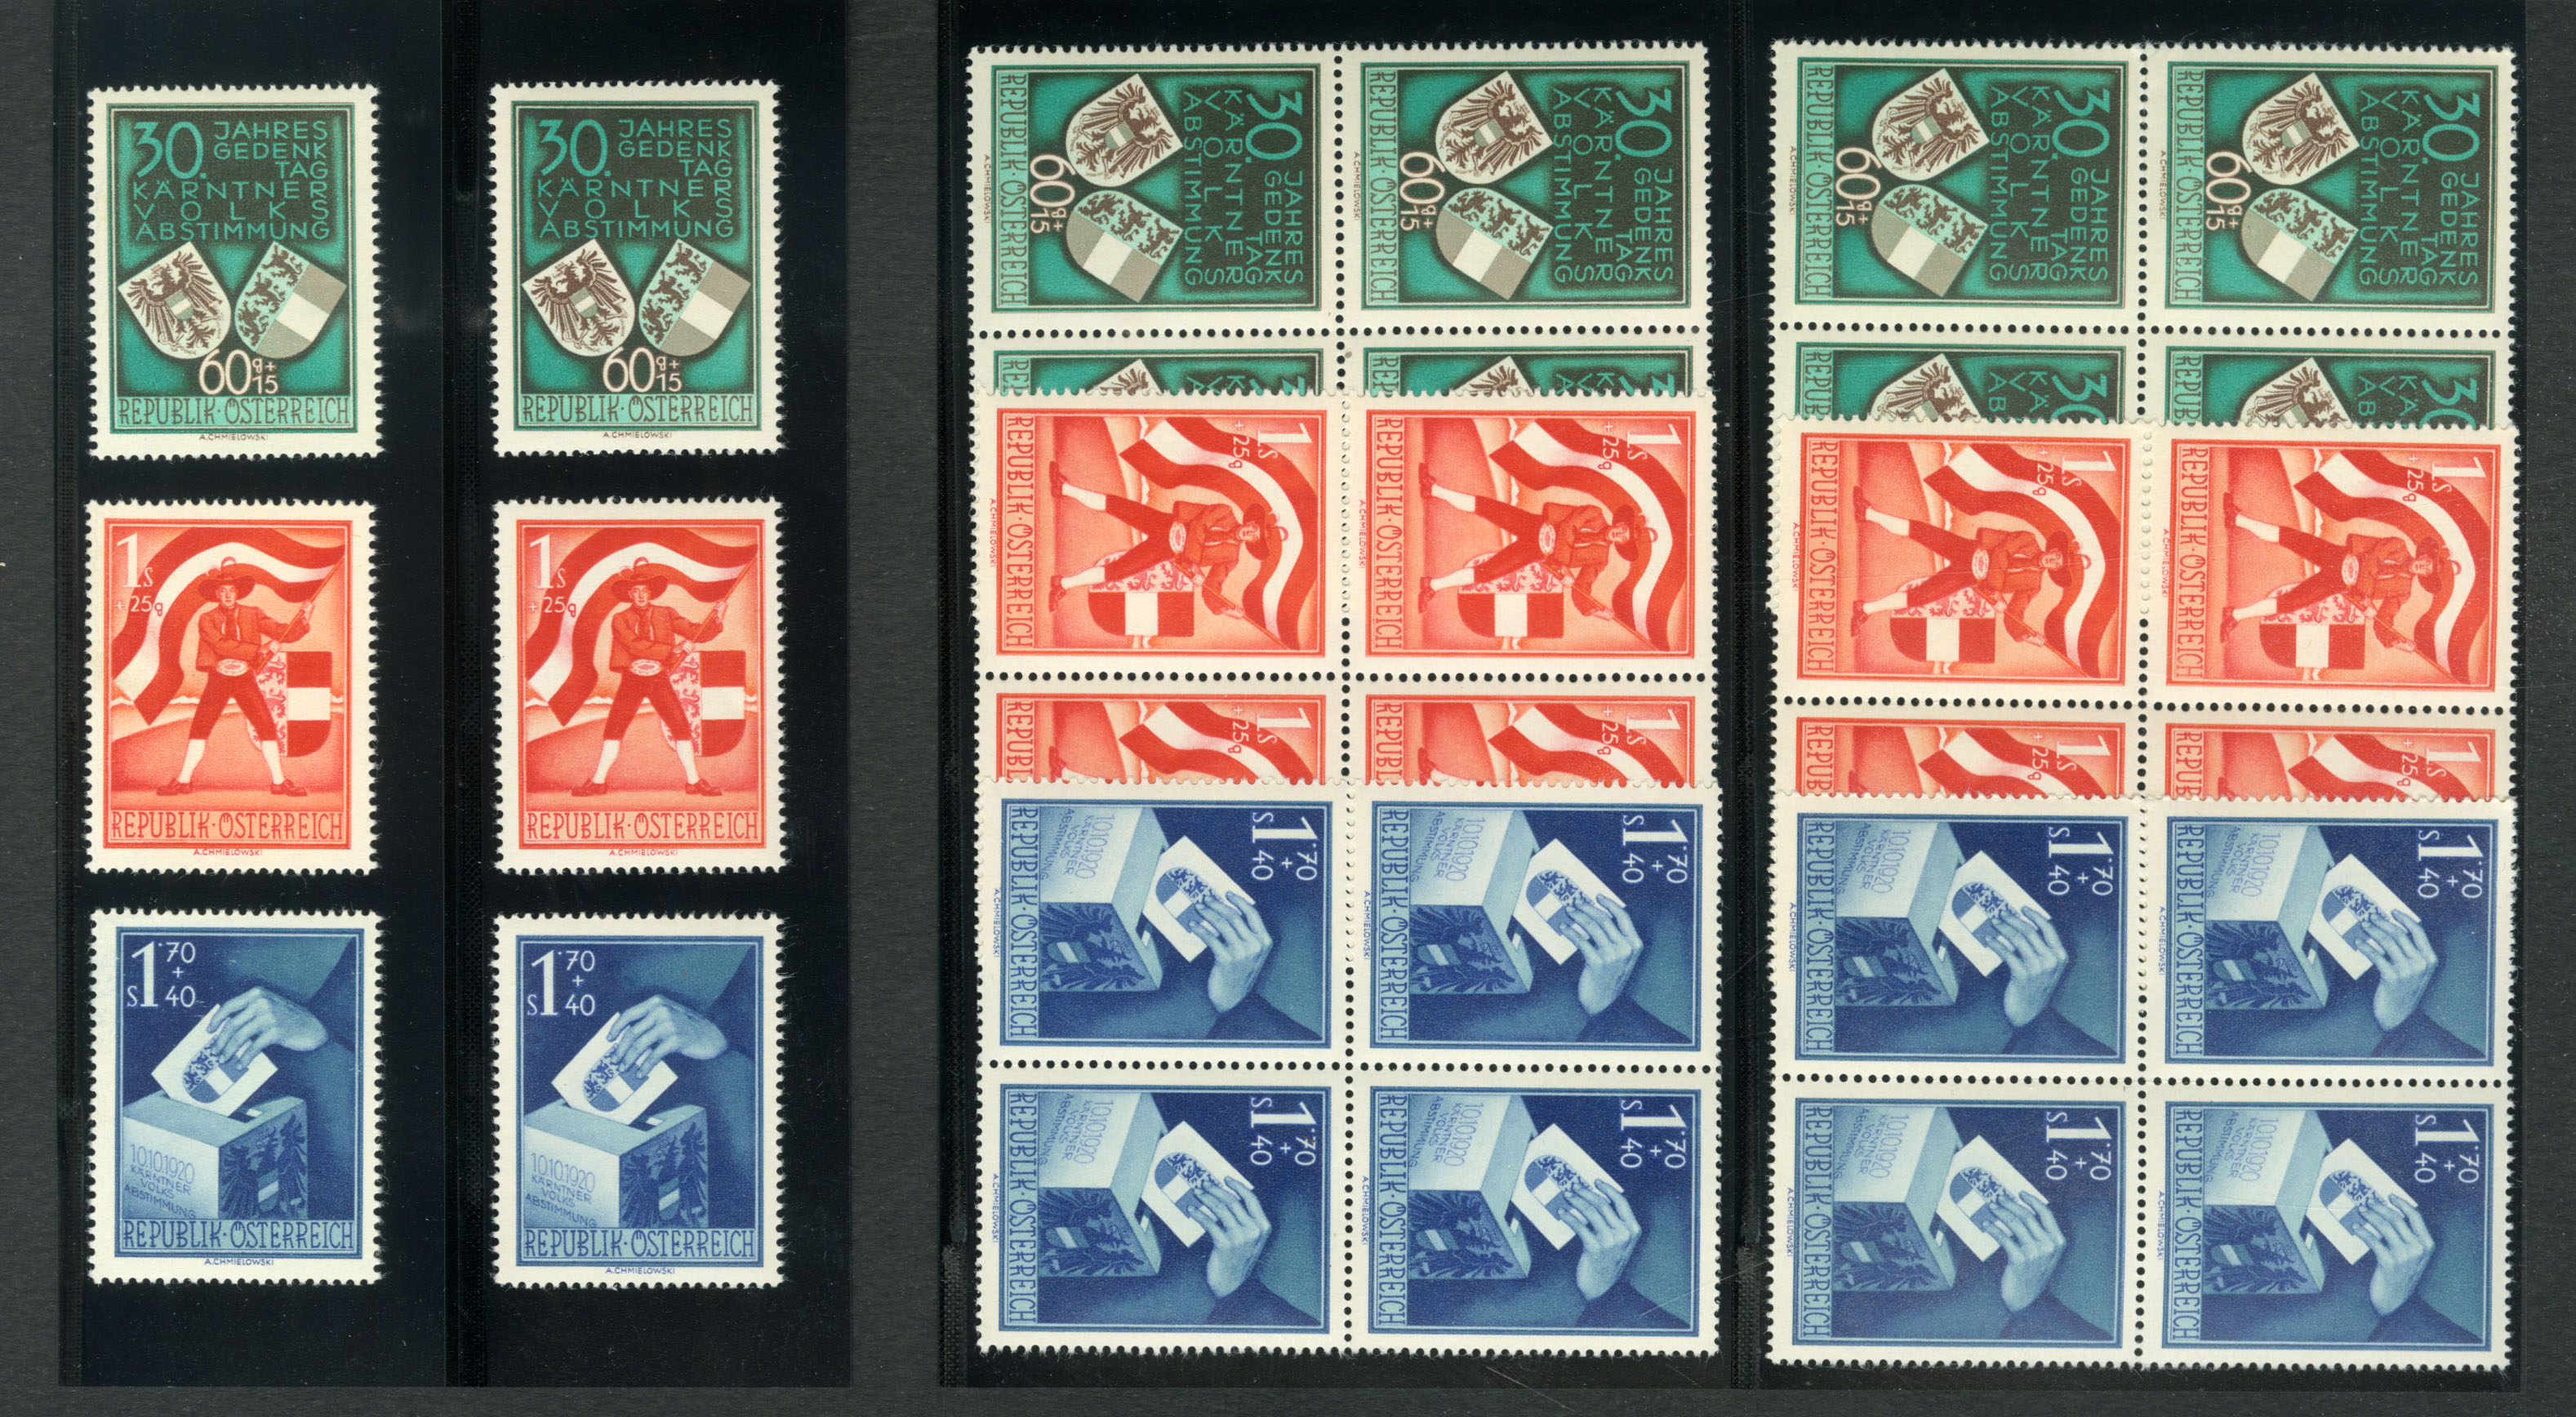 Lot 268 - AUSTRIA Austria - Post WWII Local Issues - Perg  -  Cherrystone Auctions U.S. & Worldwide Stamps & Postal History